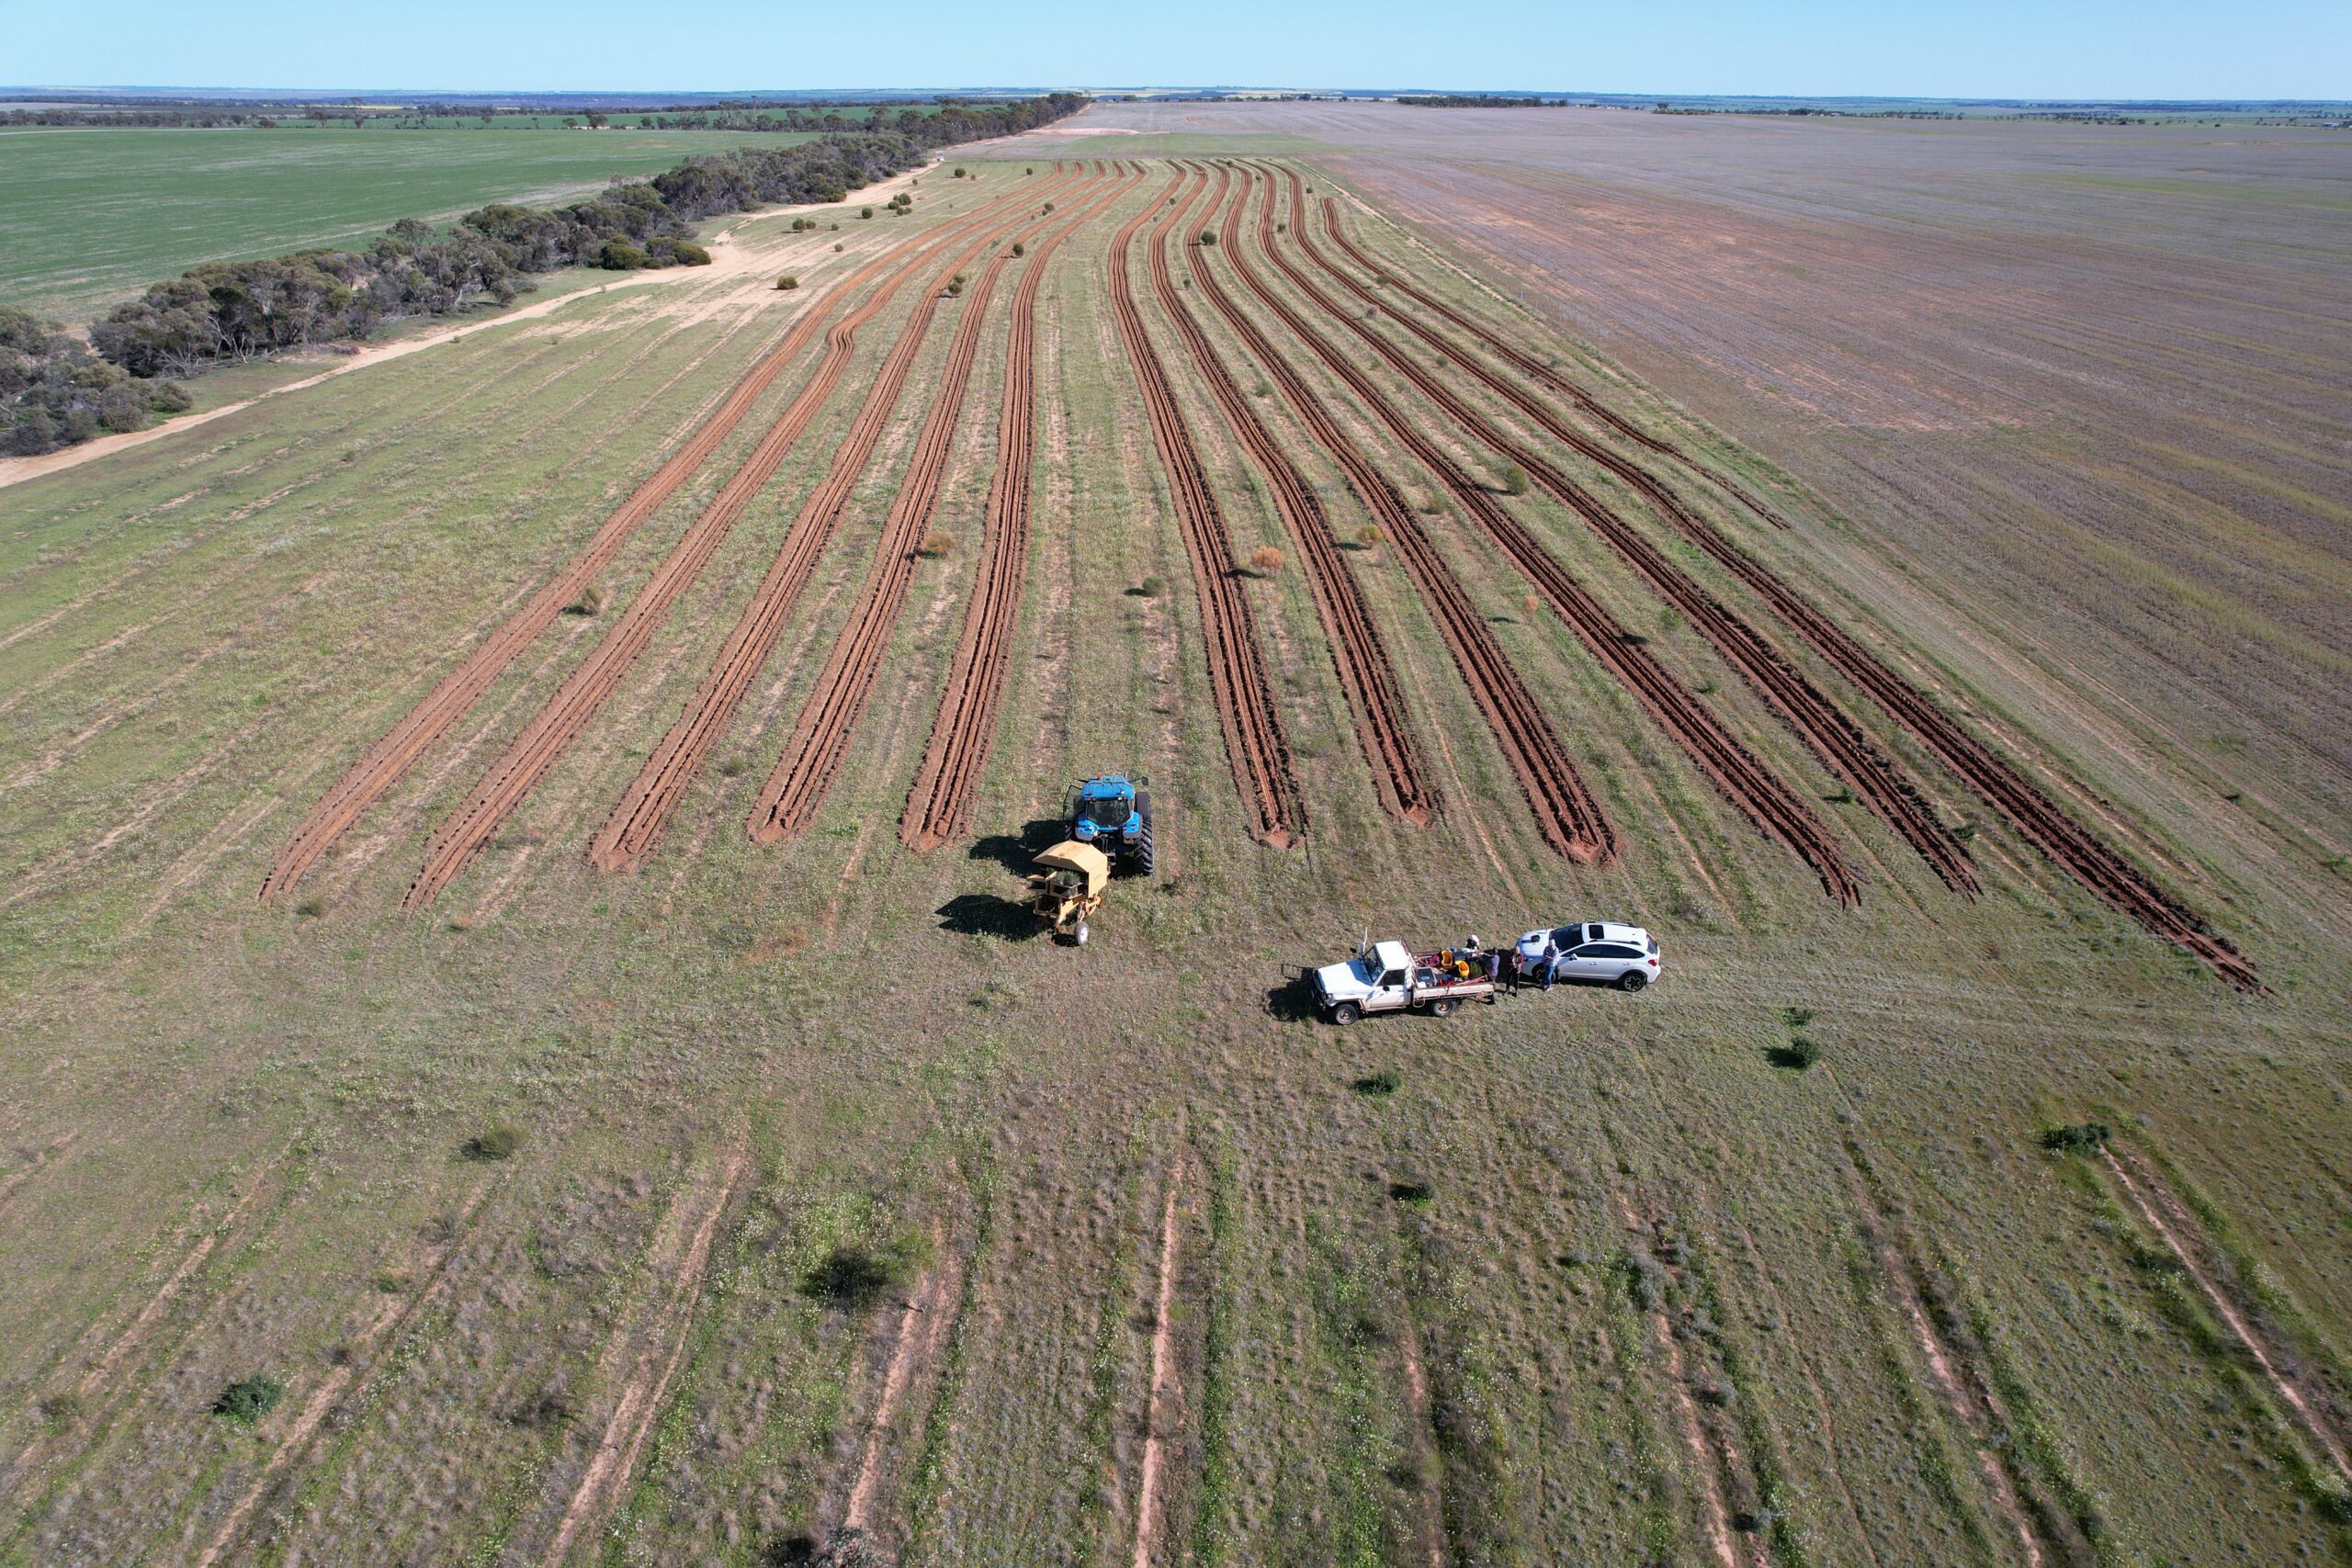 Drone photo of tree planting project with tractor and cars in the foreground